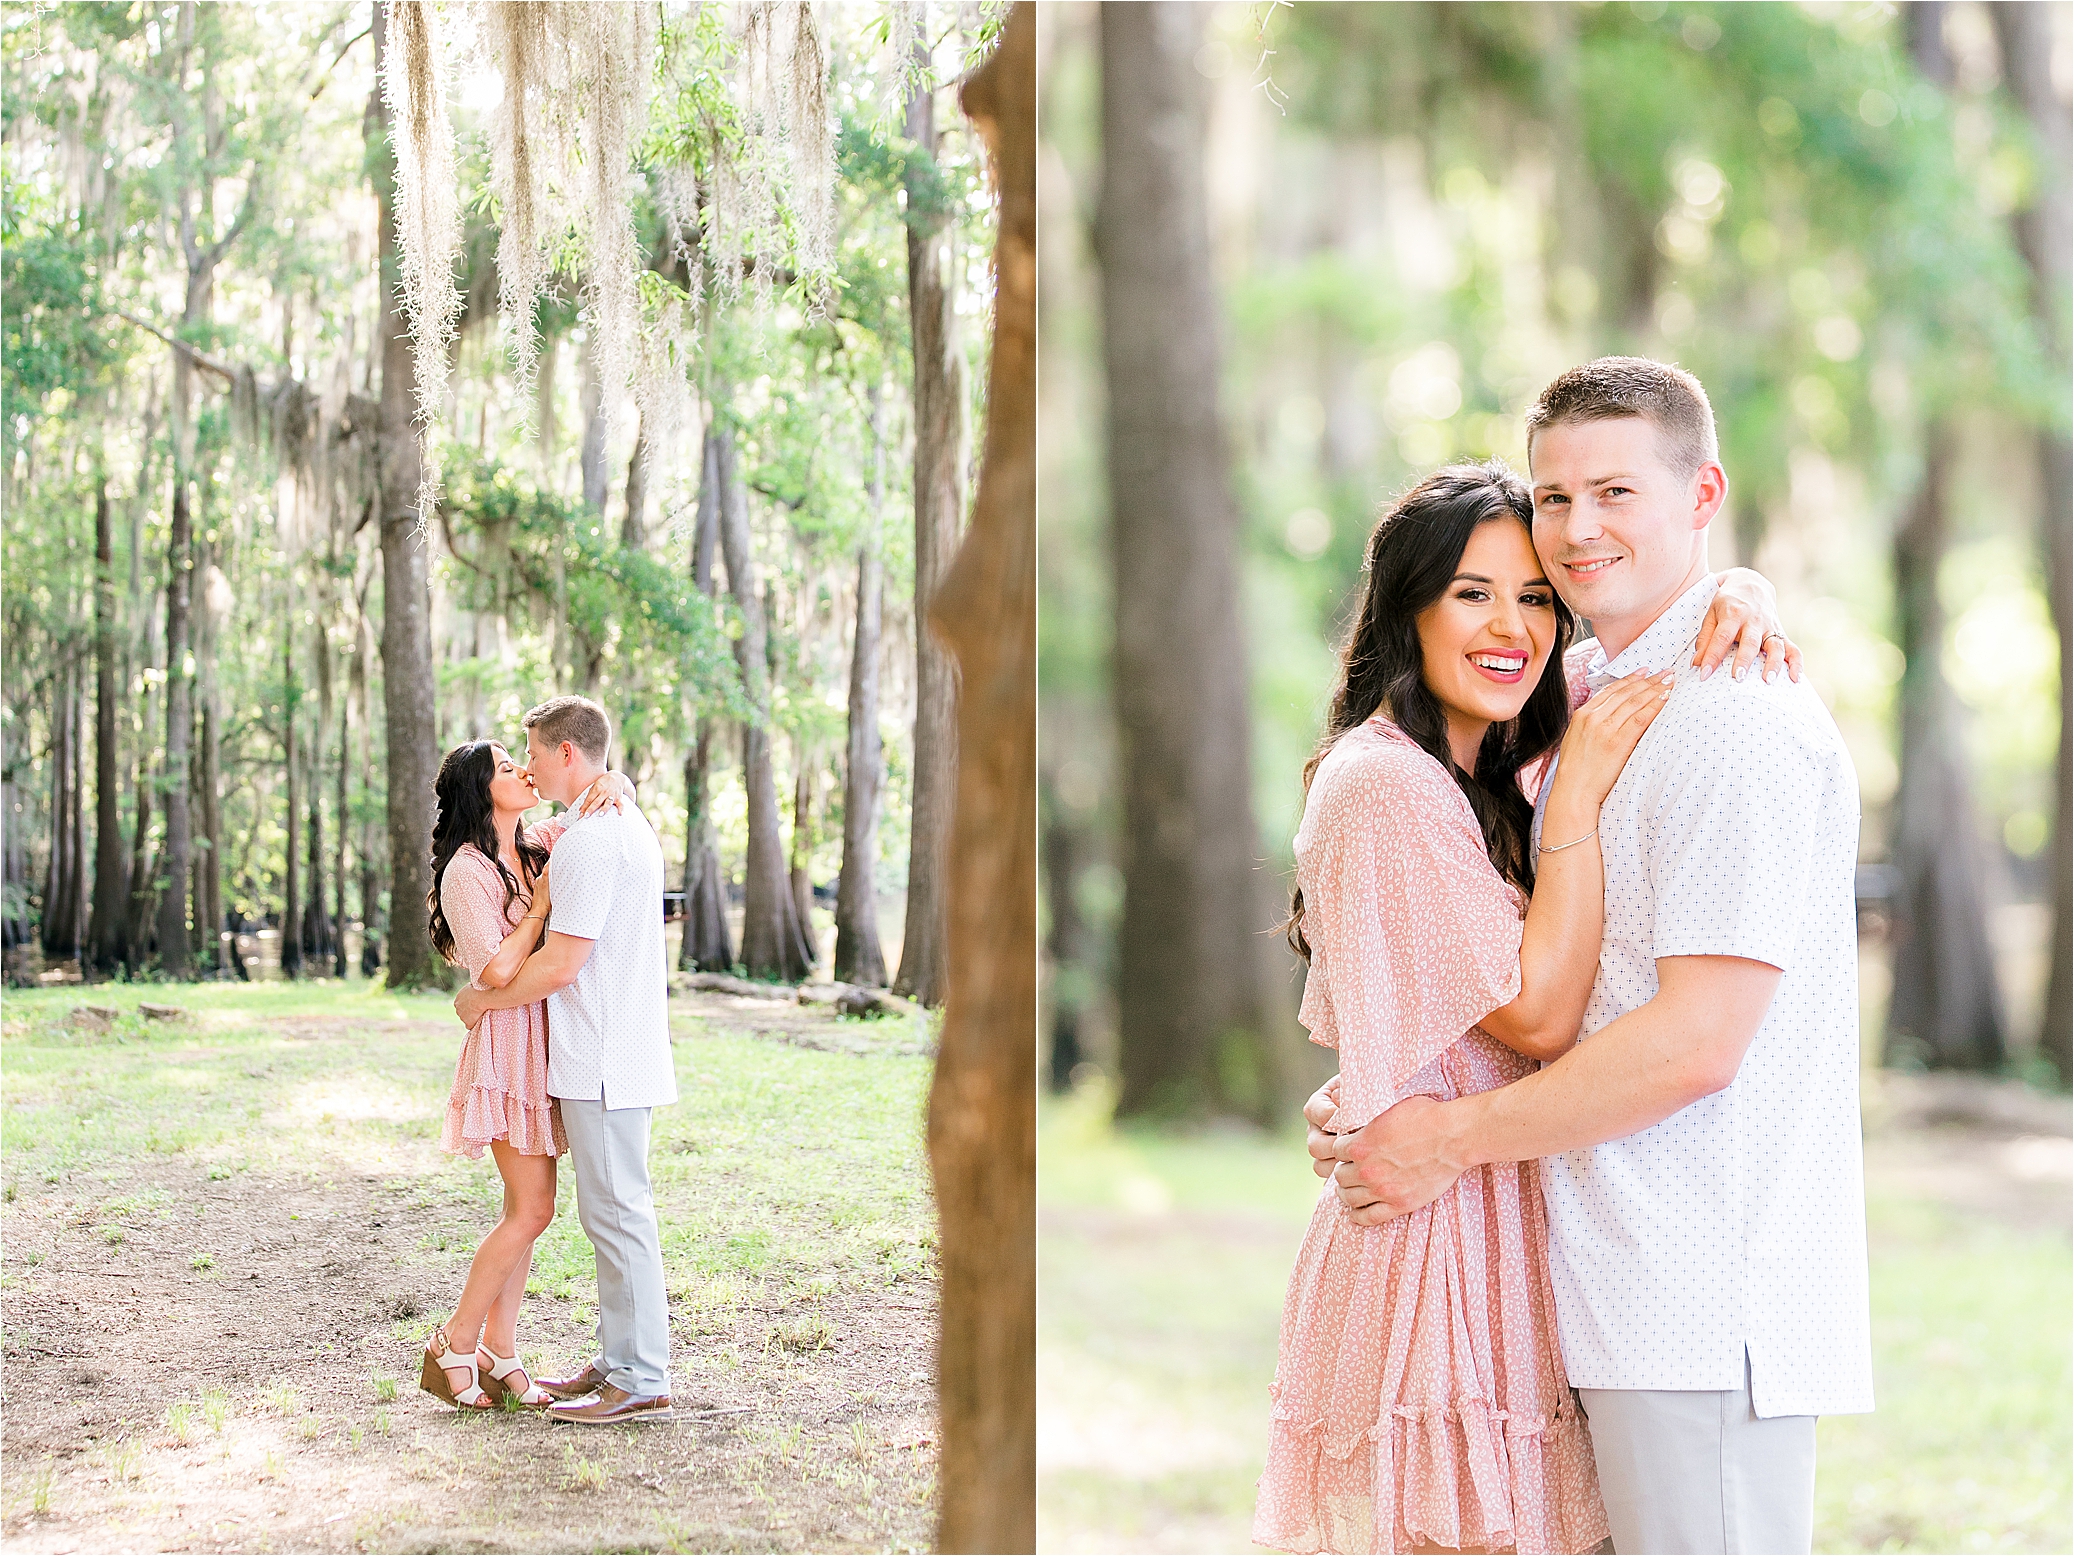 Sunset engagement session at Caddo Lake State Park in Texas by DFW Wedding Photographer Jillian Hogan 